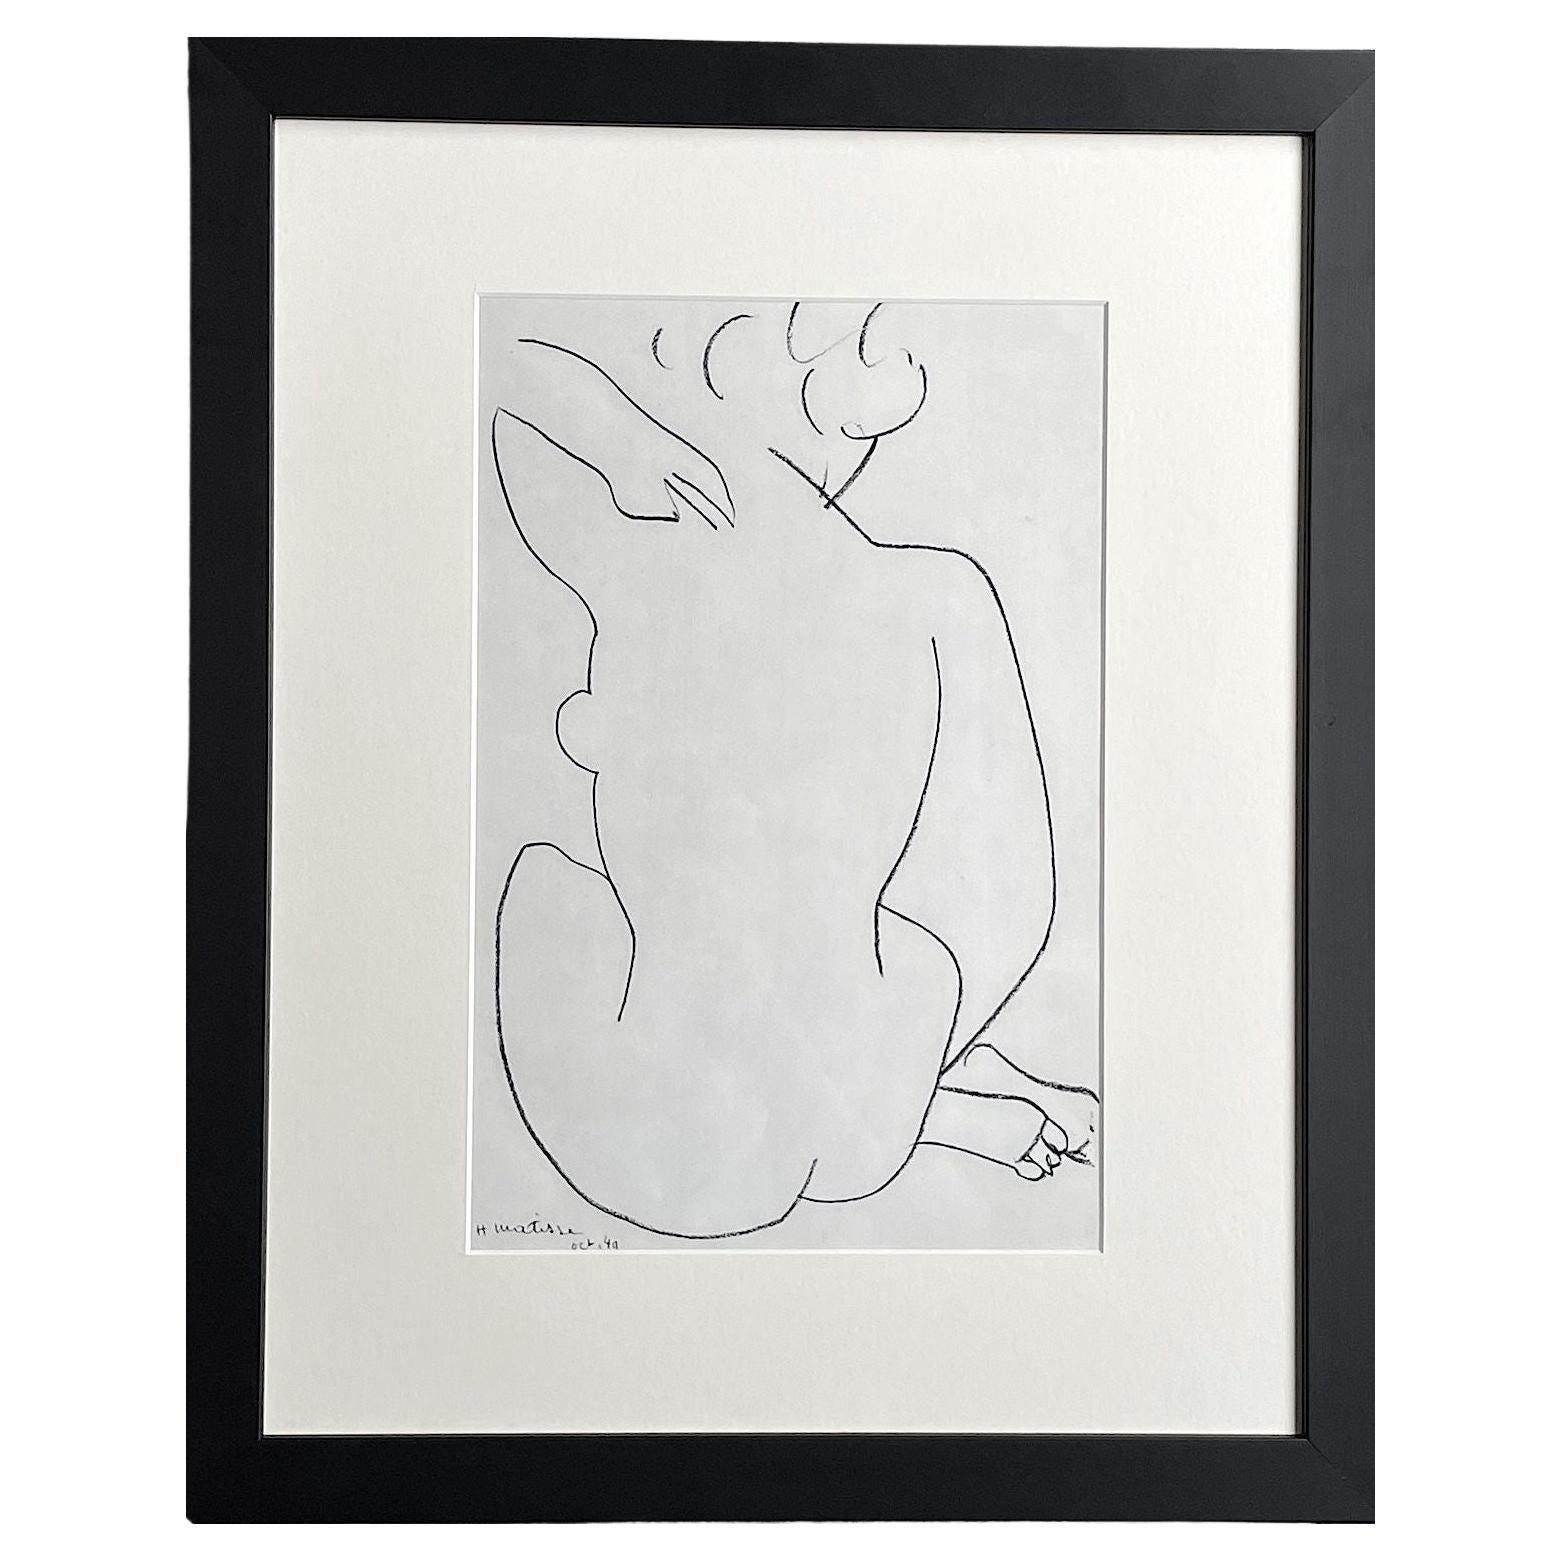 Henri Matisse "Nude" Lithograph Printed in 1954 by Mourlot Freres Presses, Paris